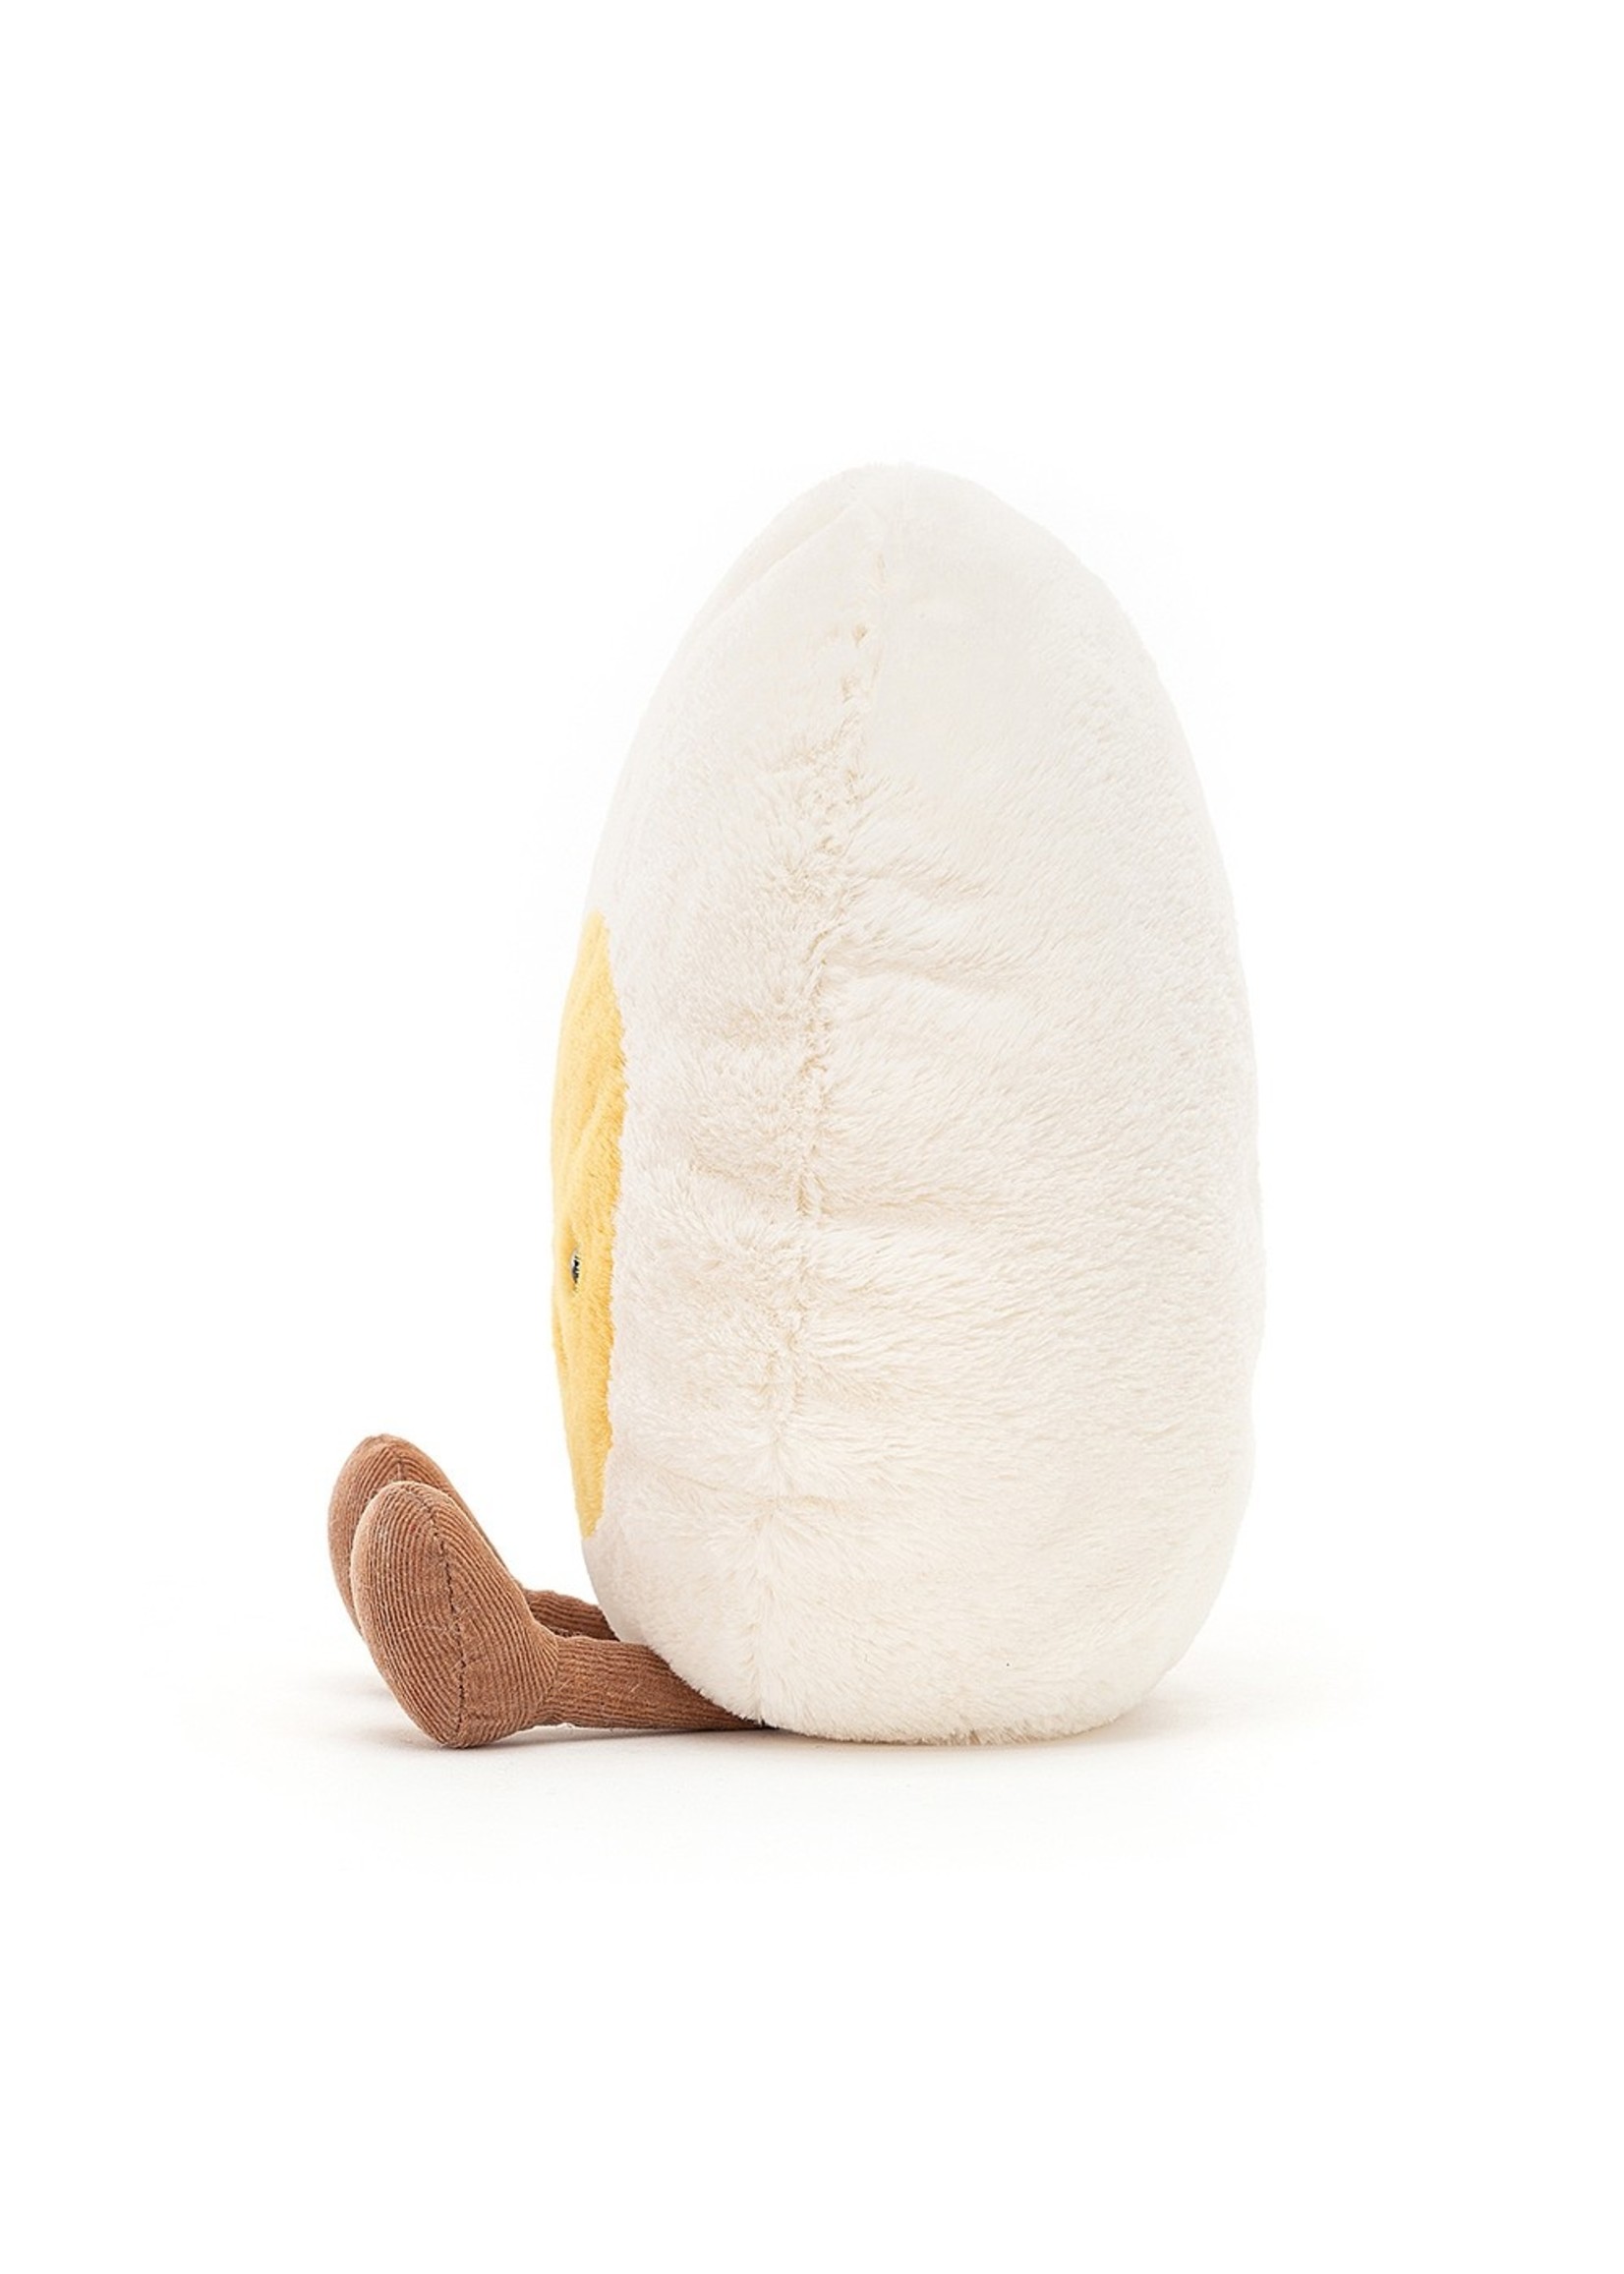 Jellycat Amuseable Boiled Egg - Large